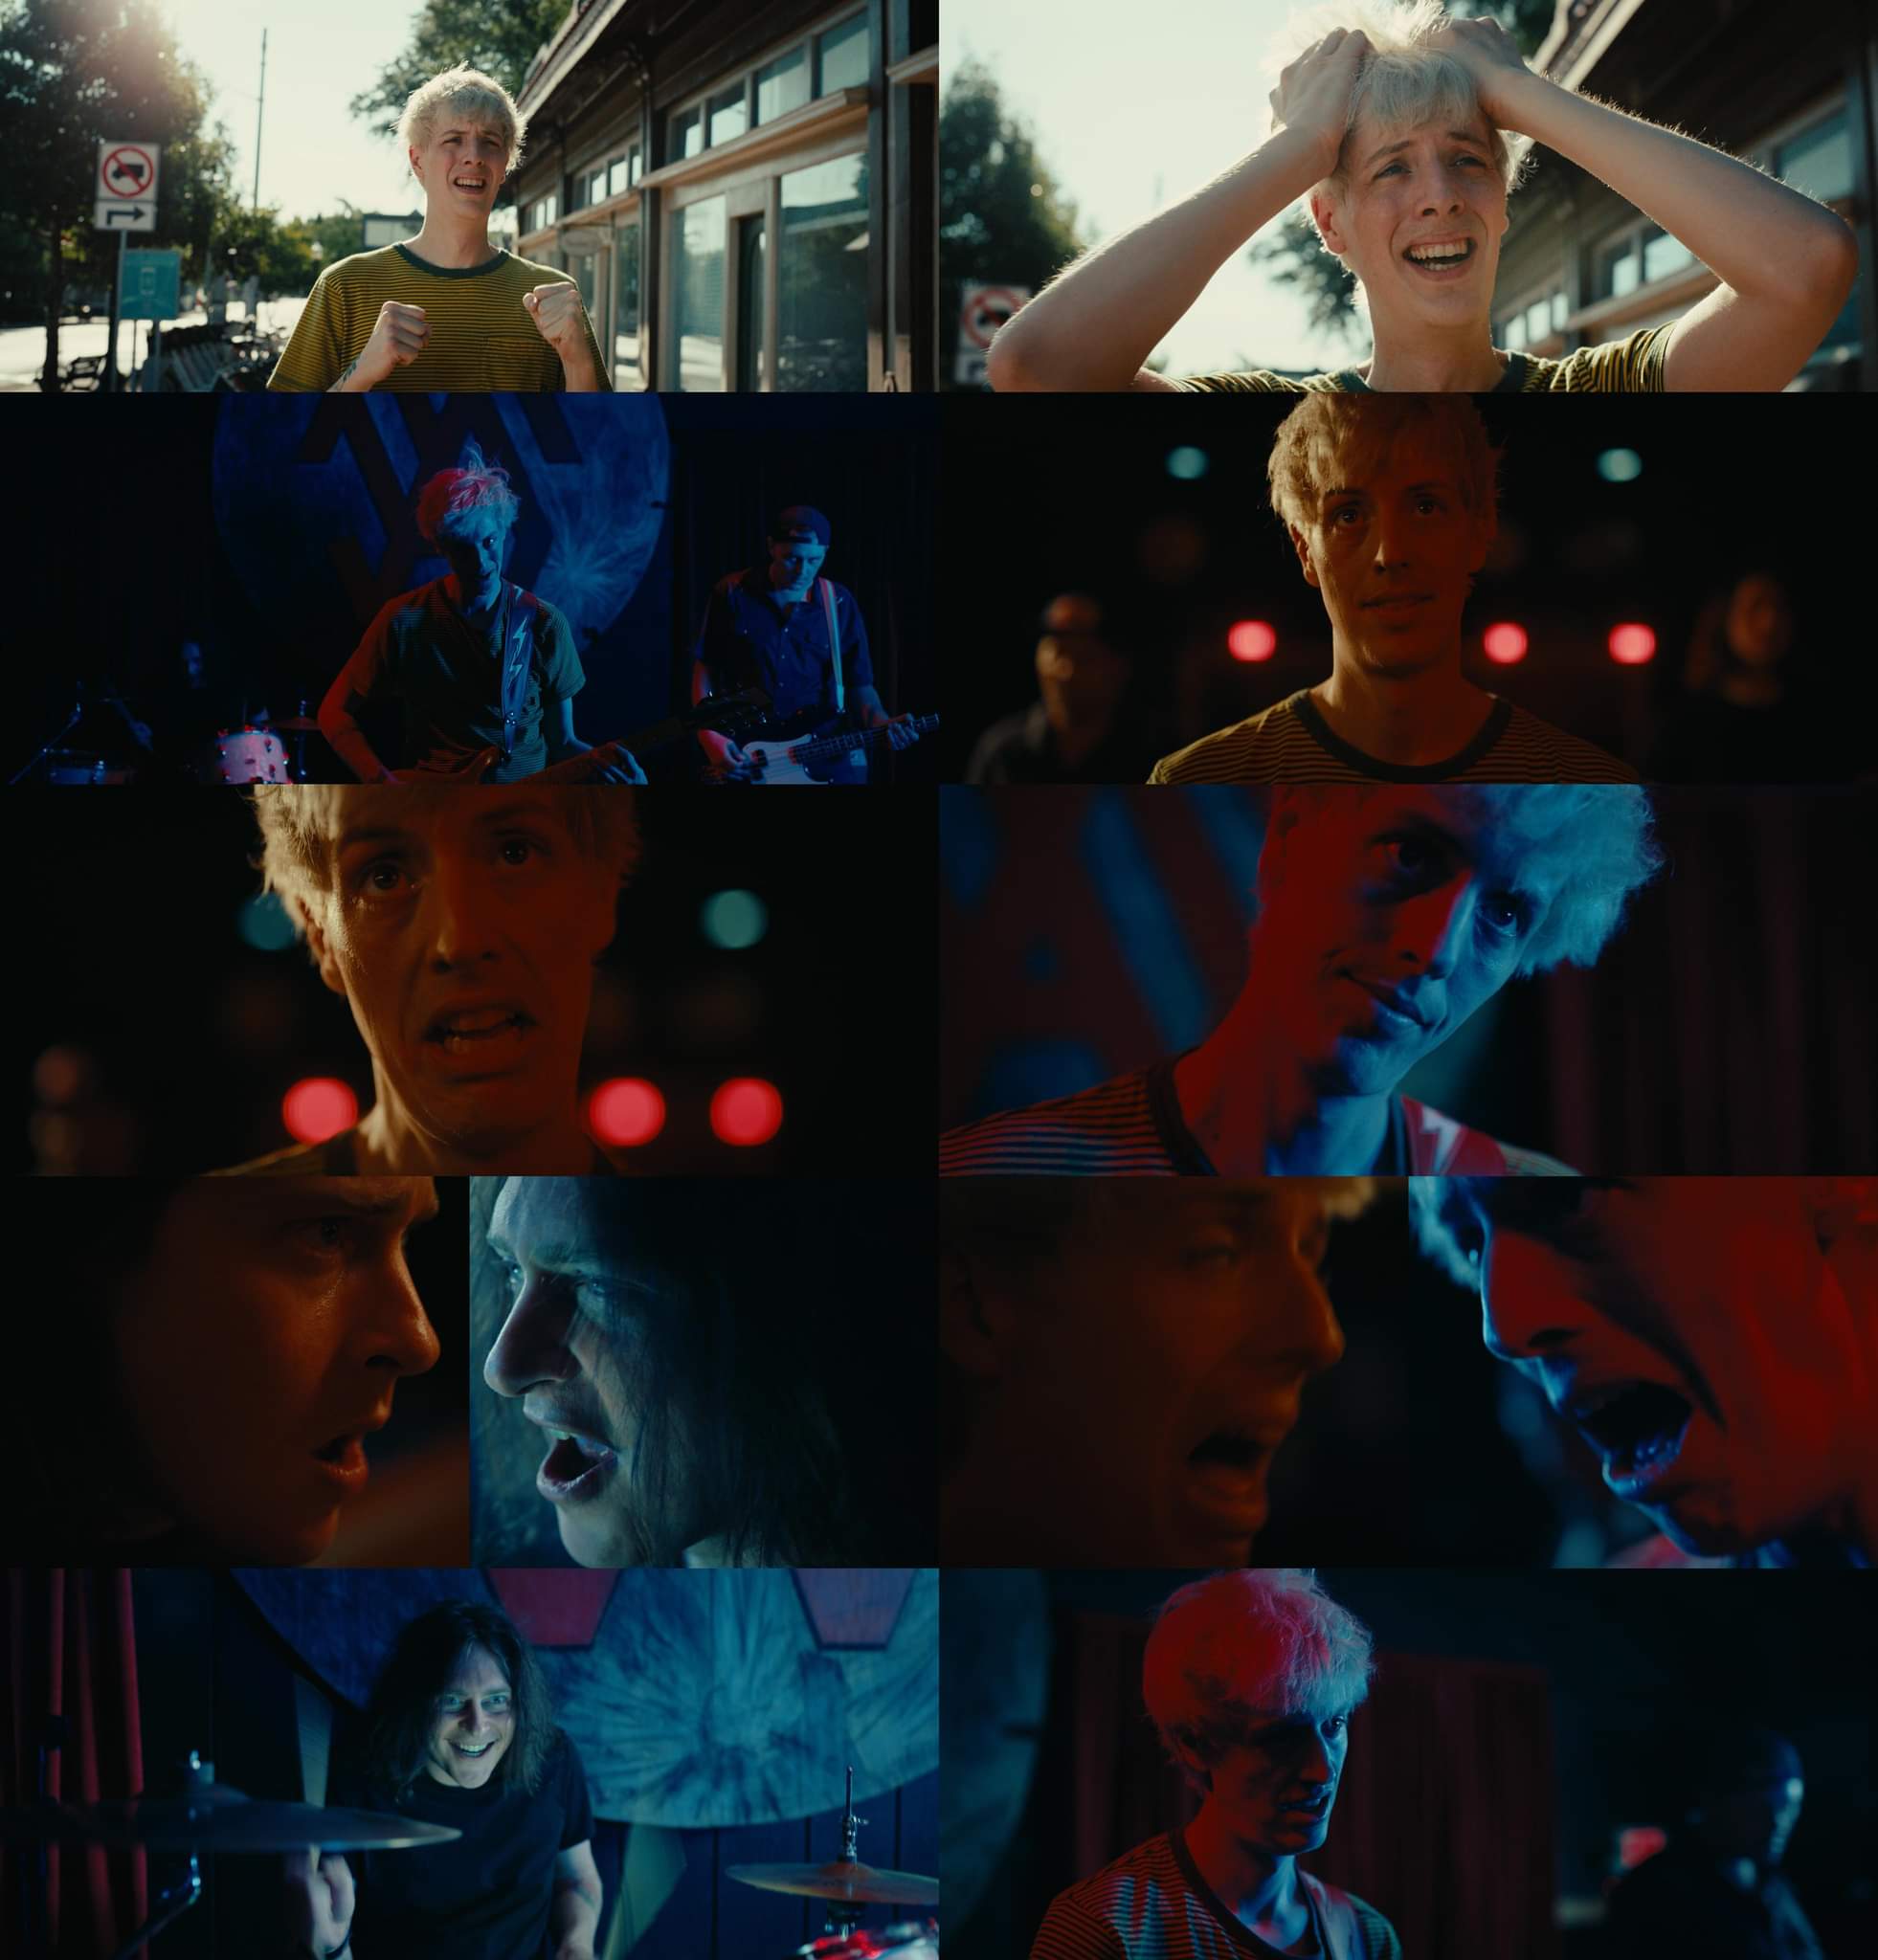 A collection of screen shots from a music video